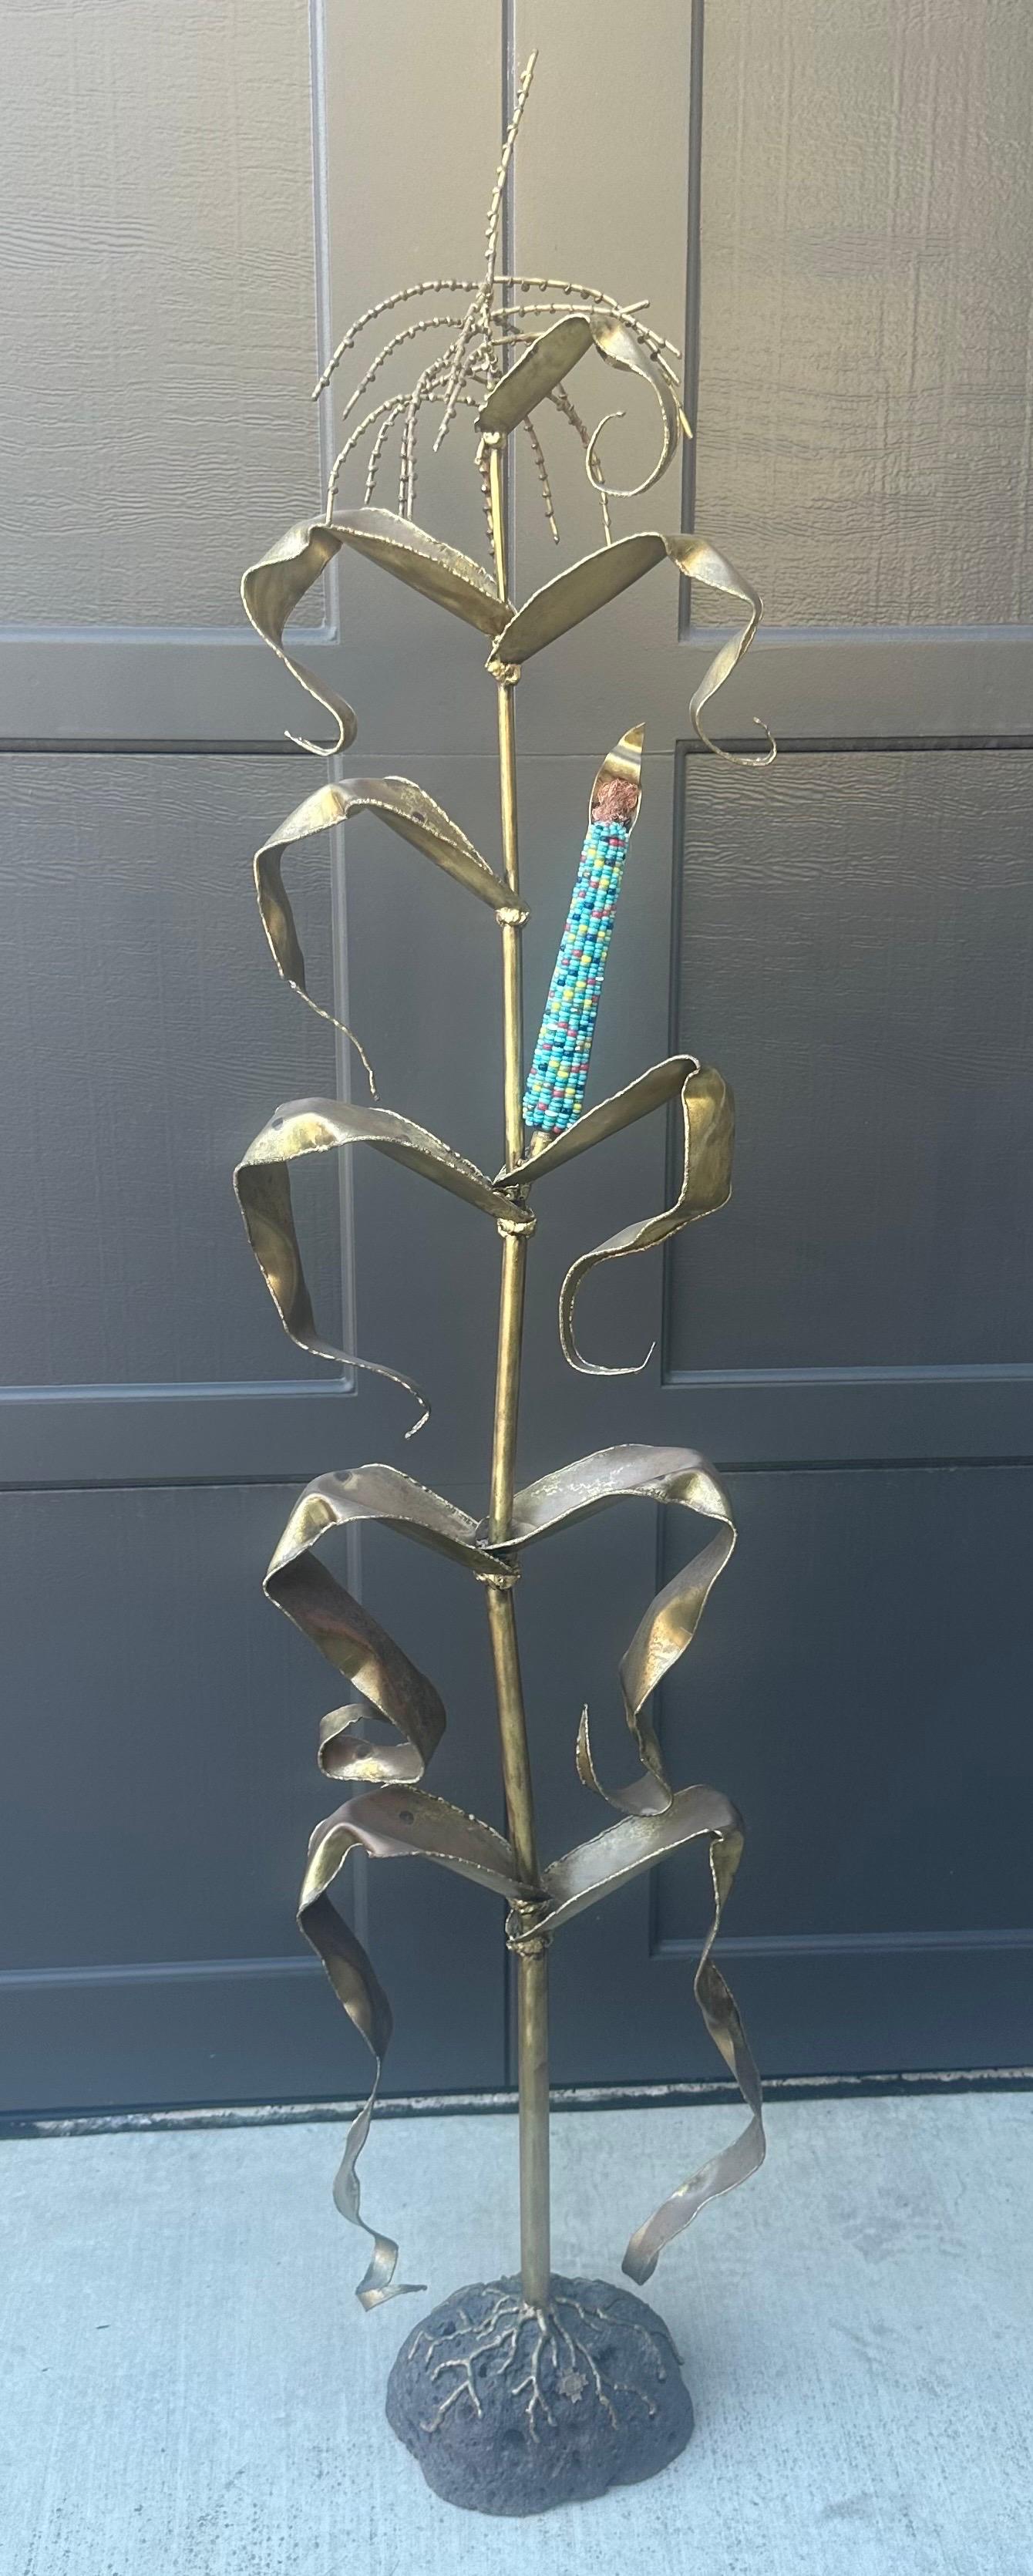 Bronze Corn Stalk with Turquoise Ear Sculpture by Charles Pratt For Sale 2